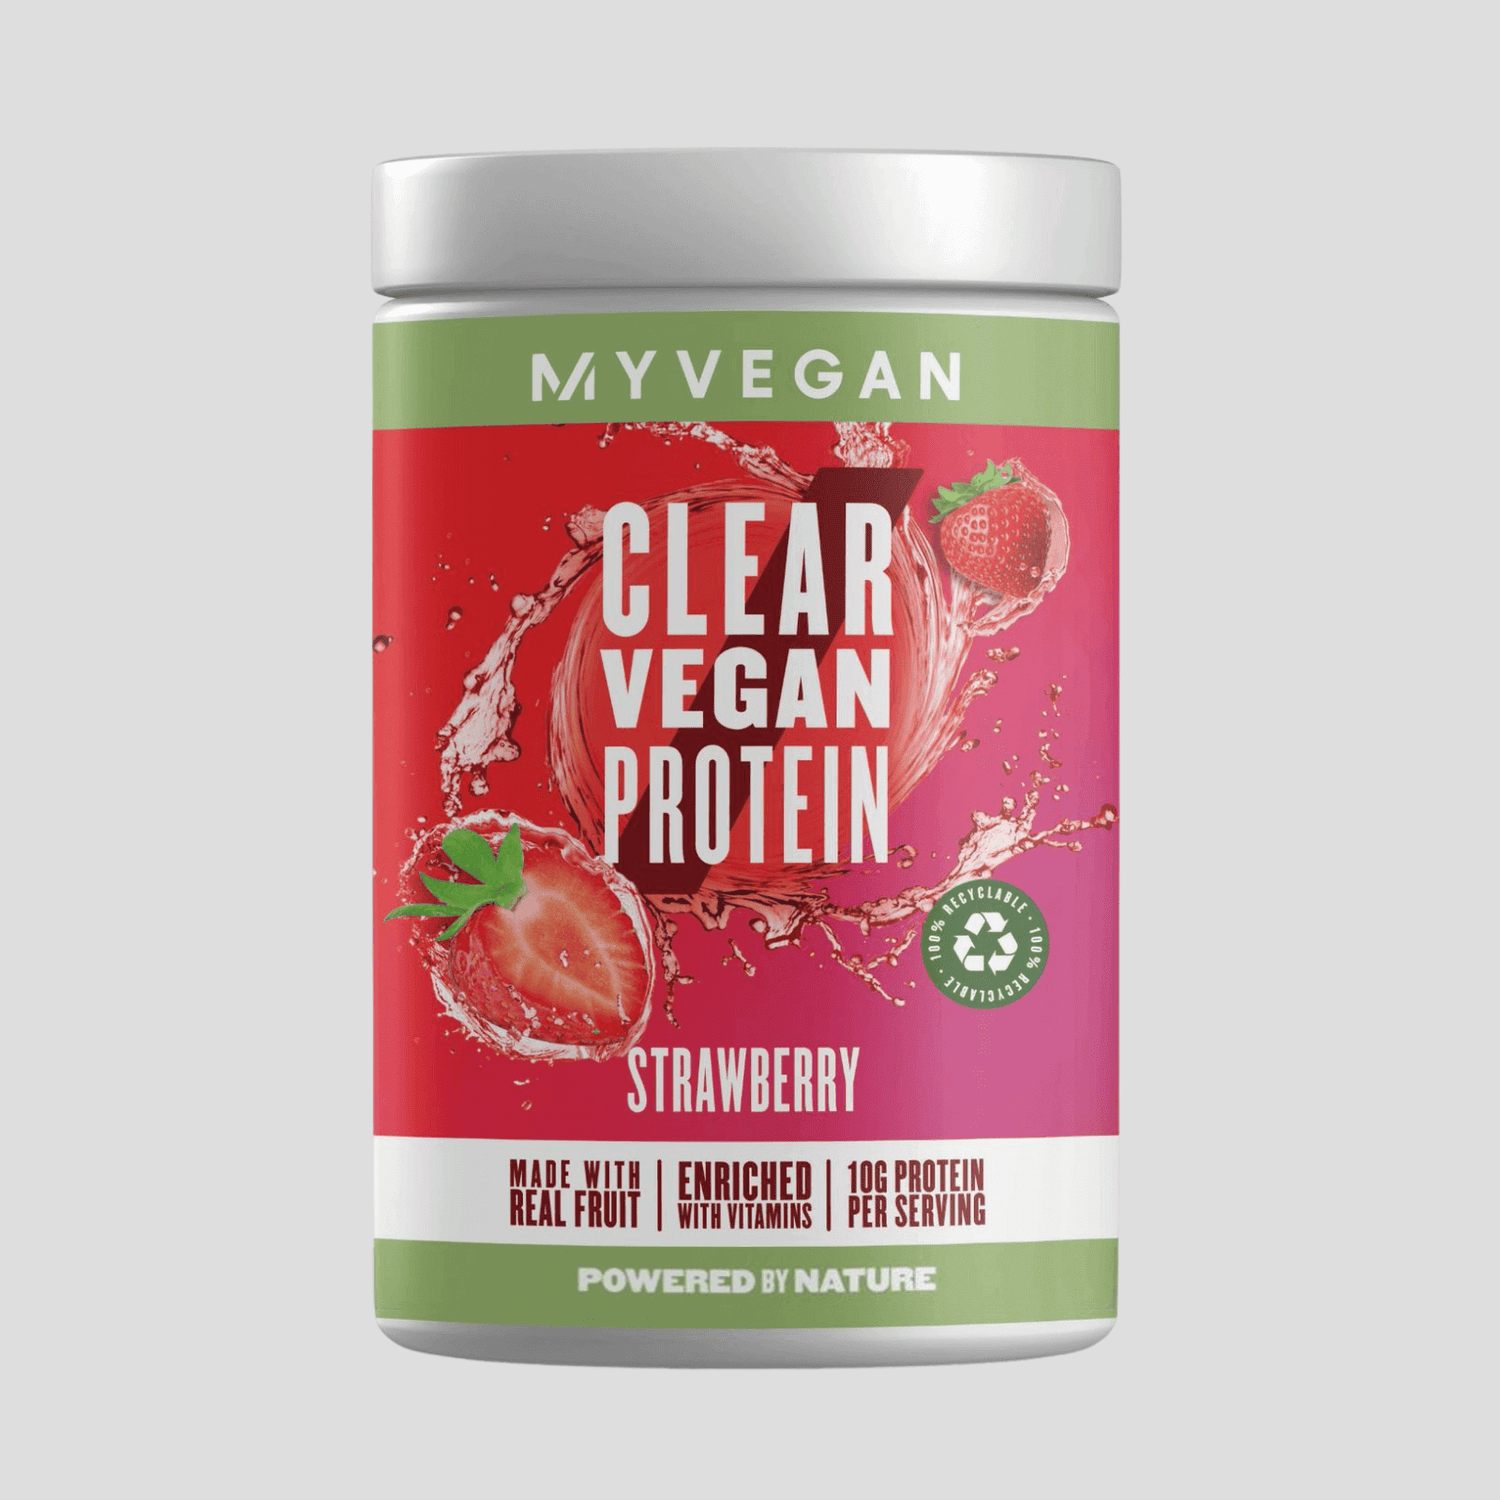 Clear Vegan Protein - 640g - Eper